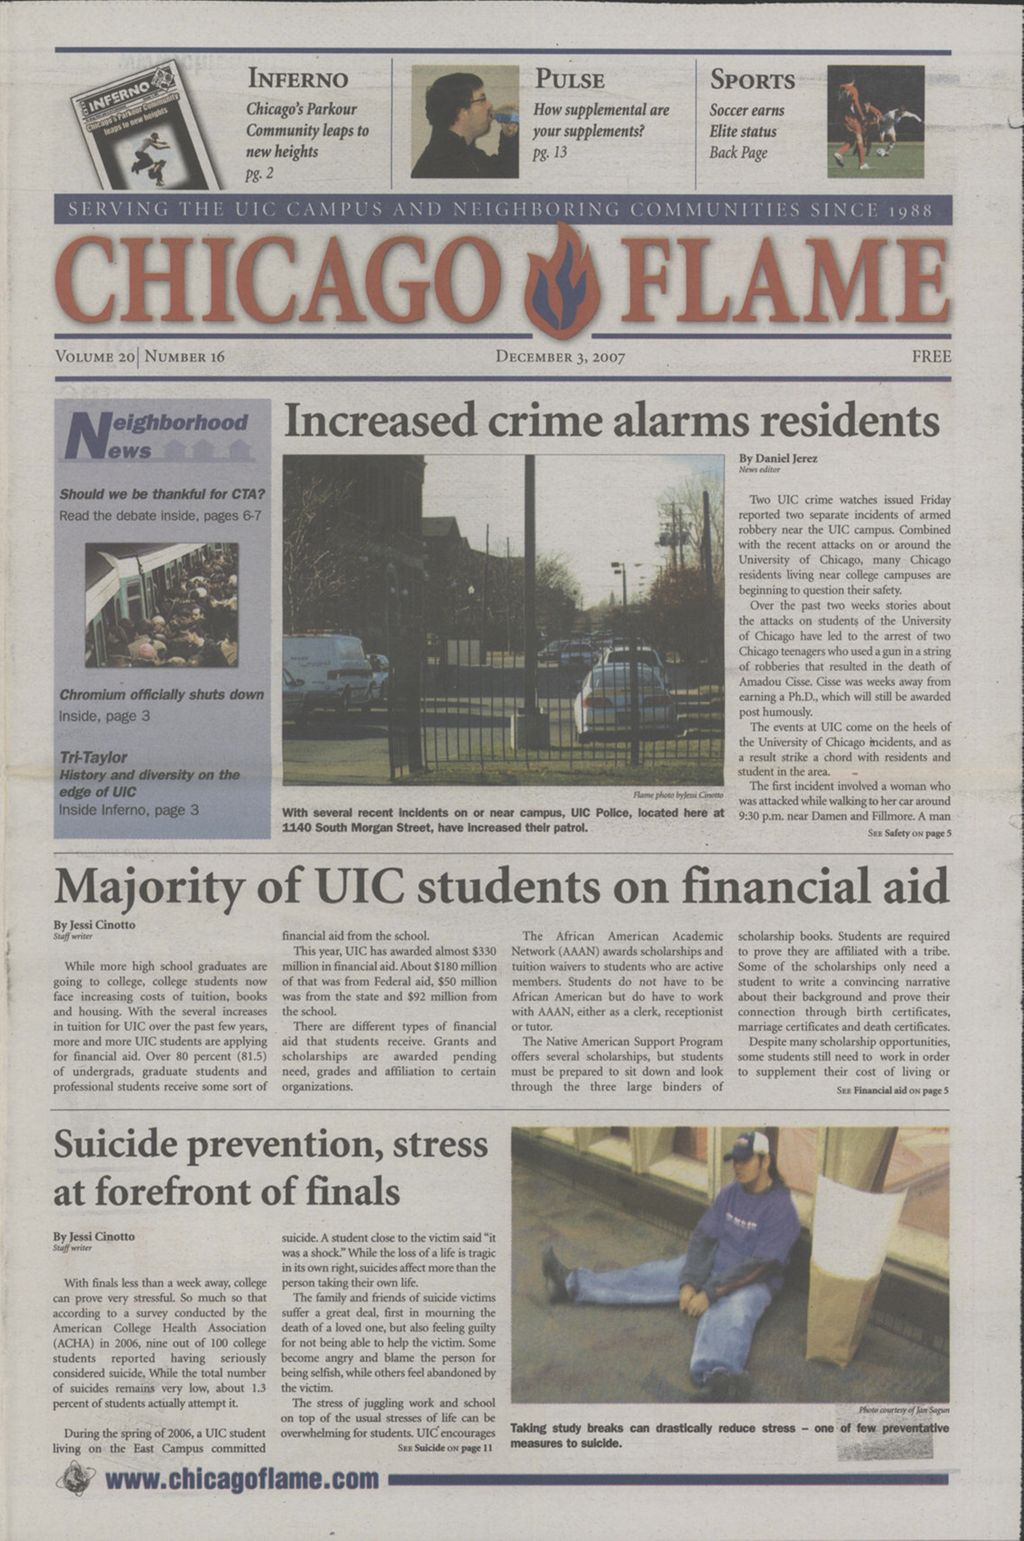 Miniature of Chicago Flame (December 3, 2007)